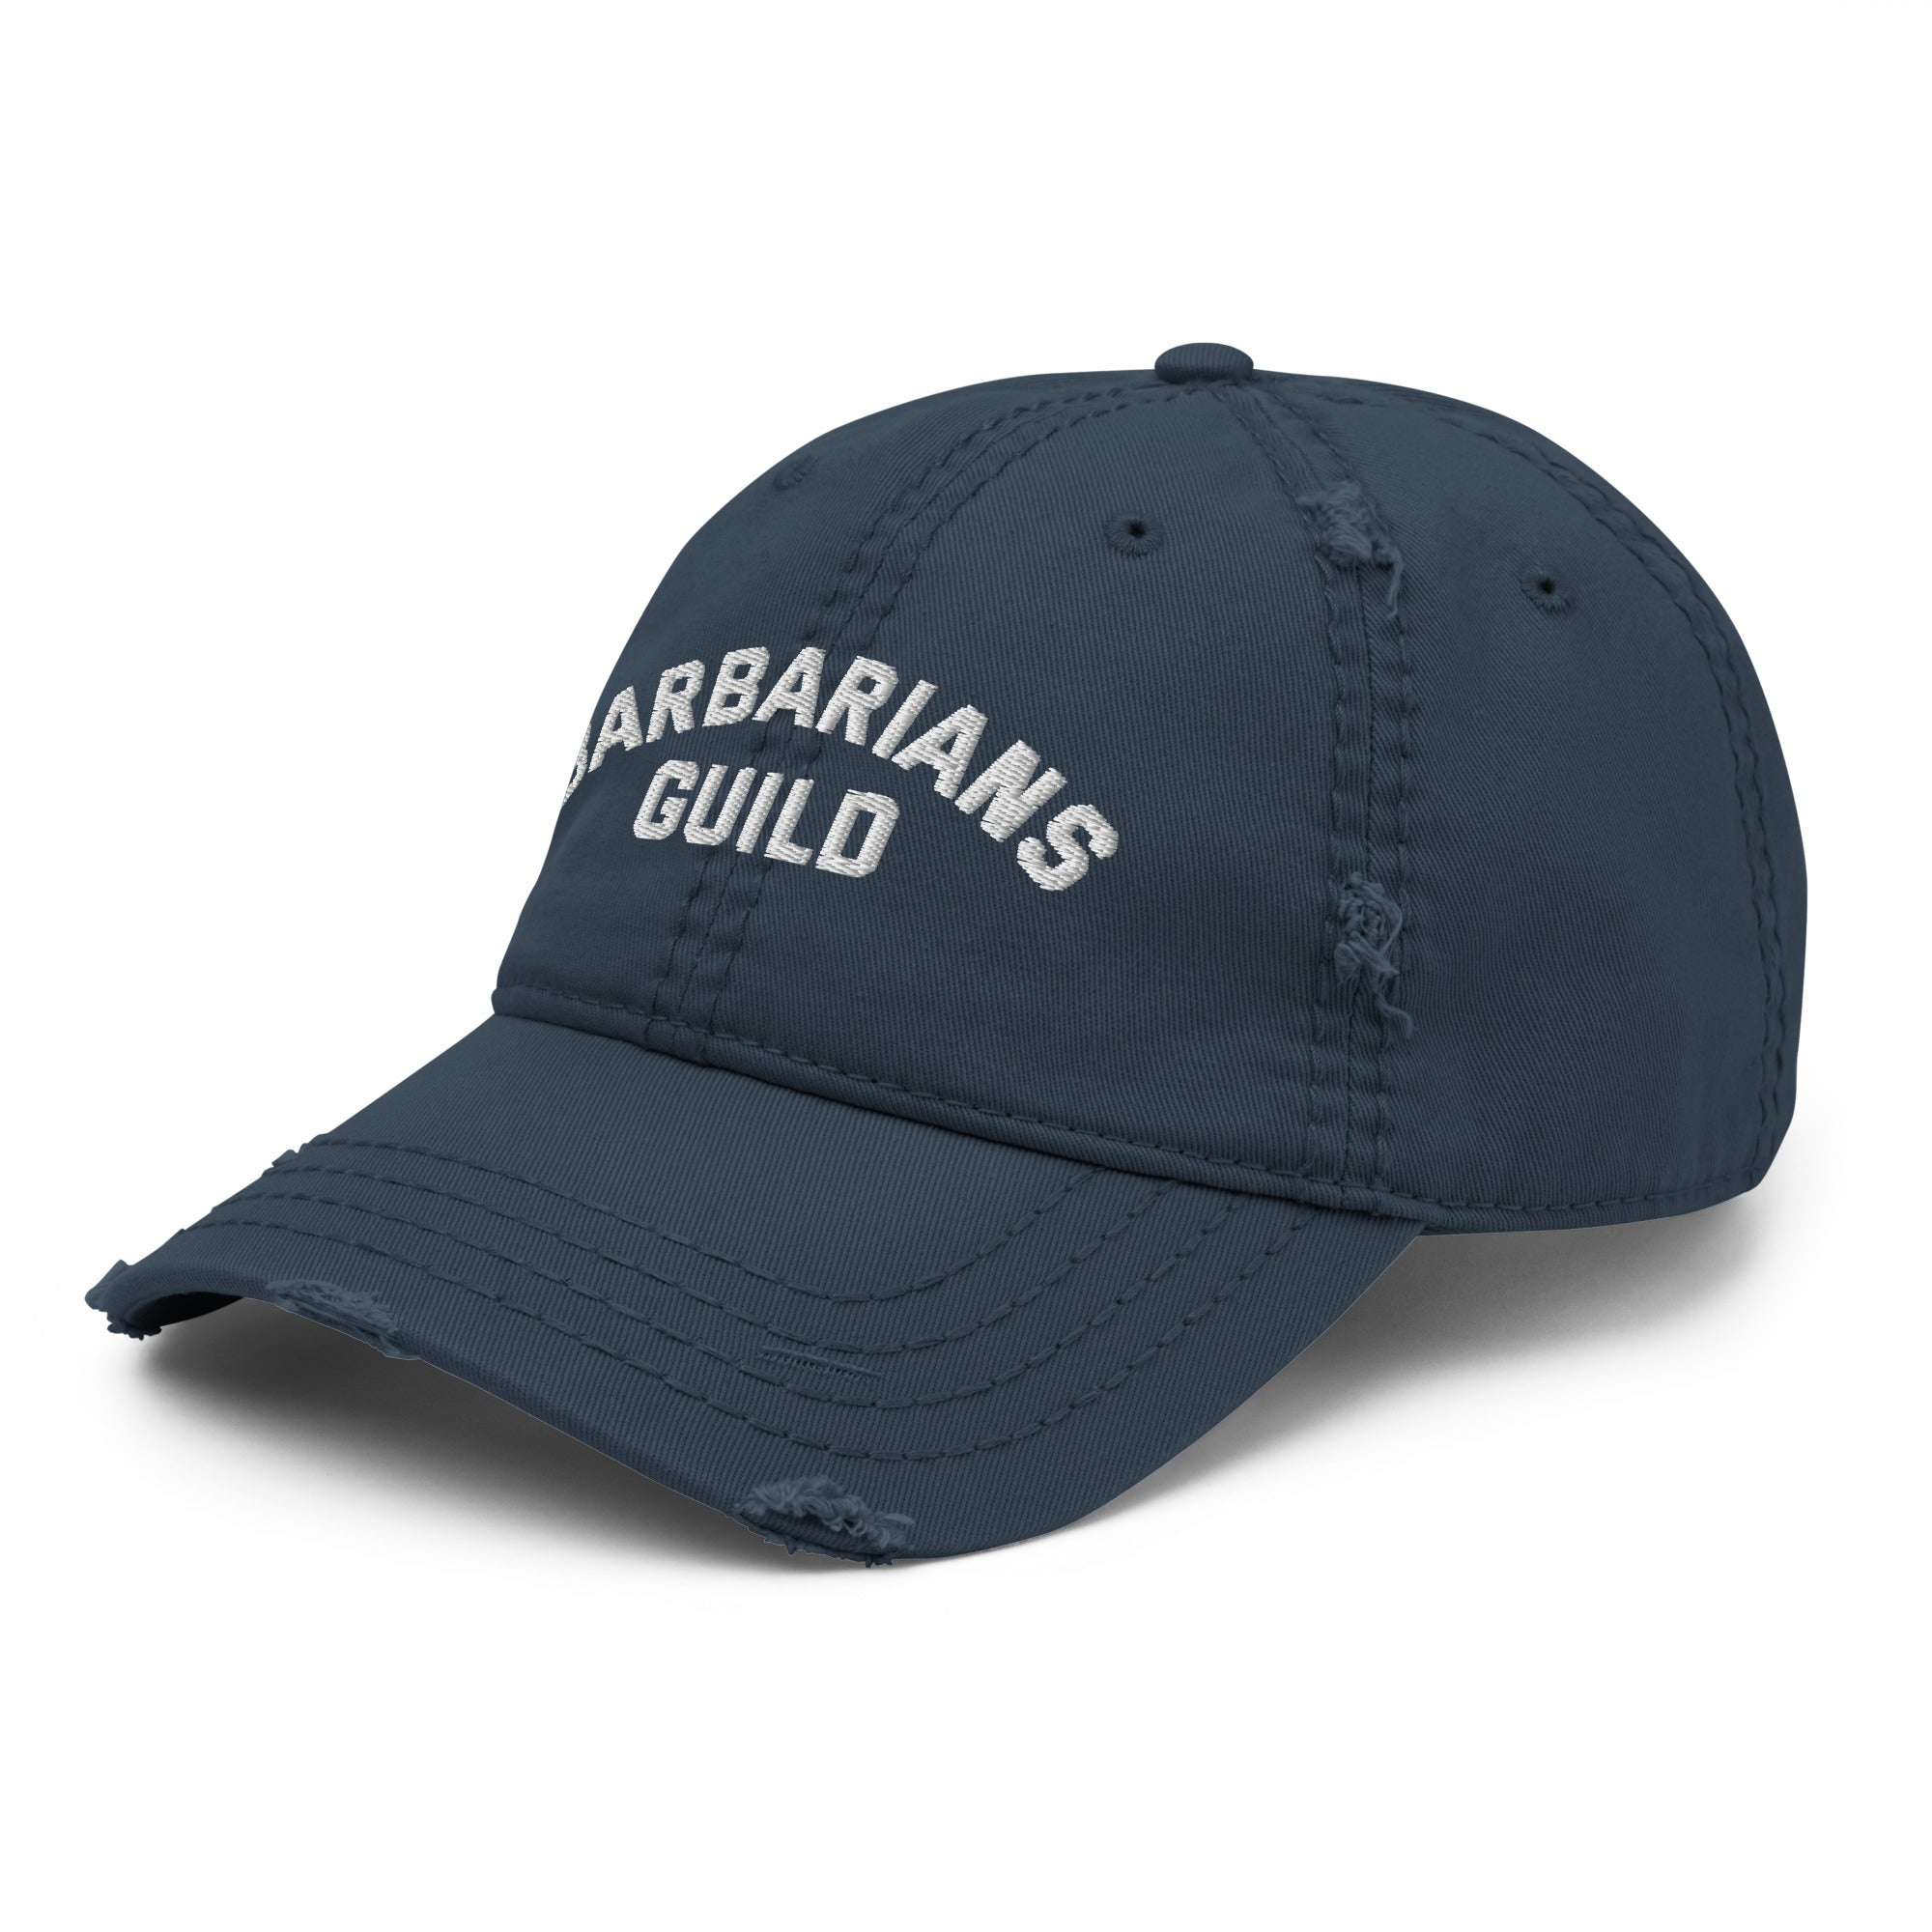 Barbarian | Distressed Hat - Ace of Gnomes - 7353048_10991